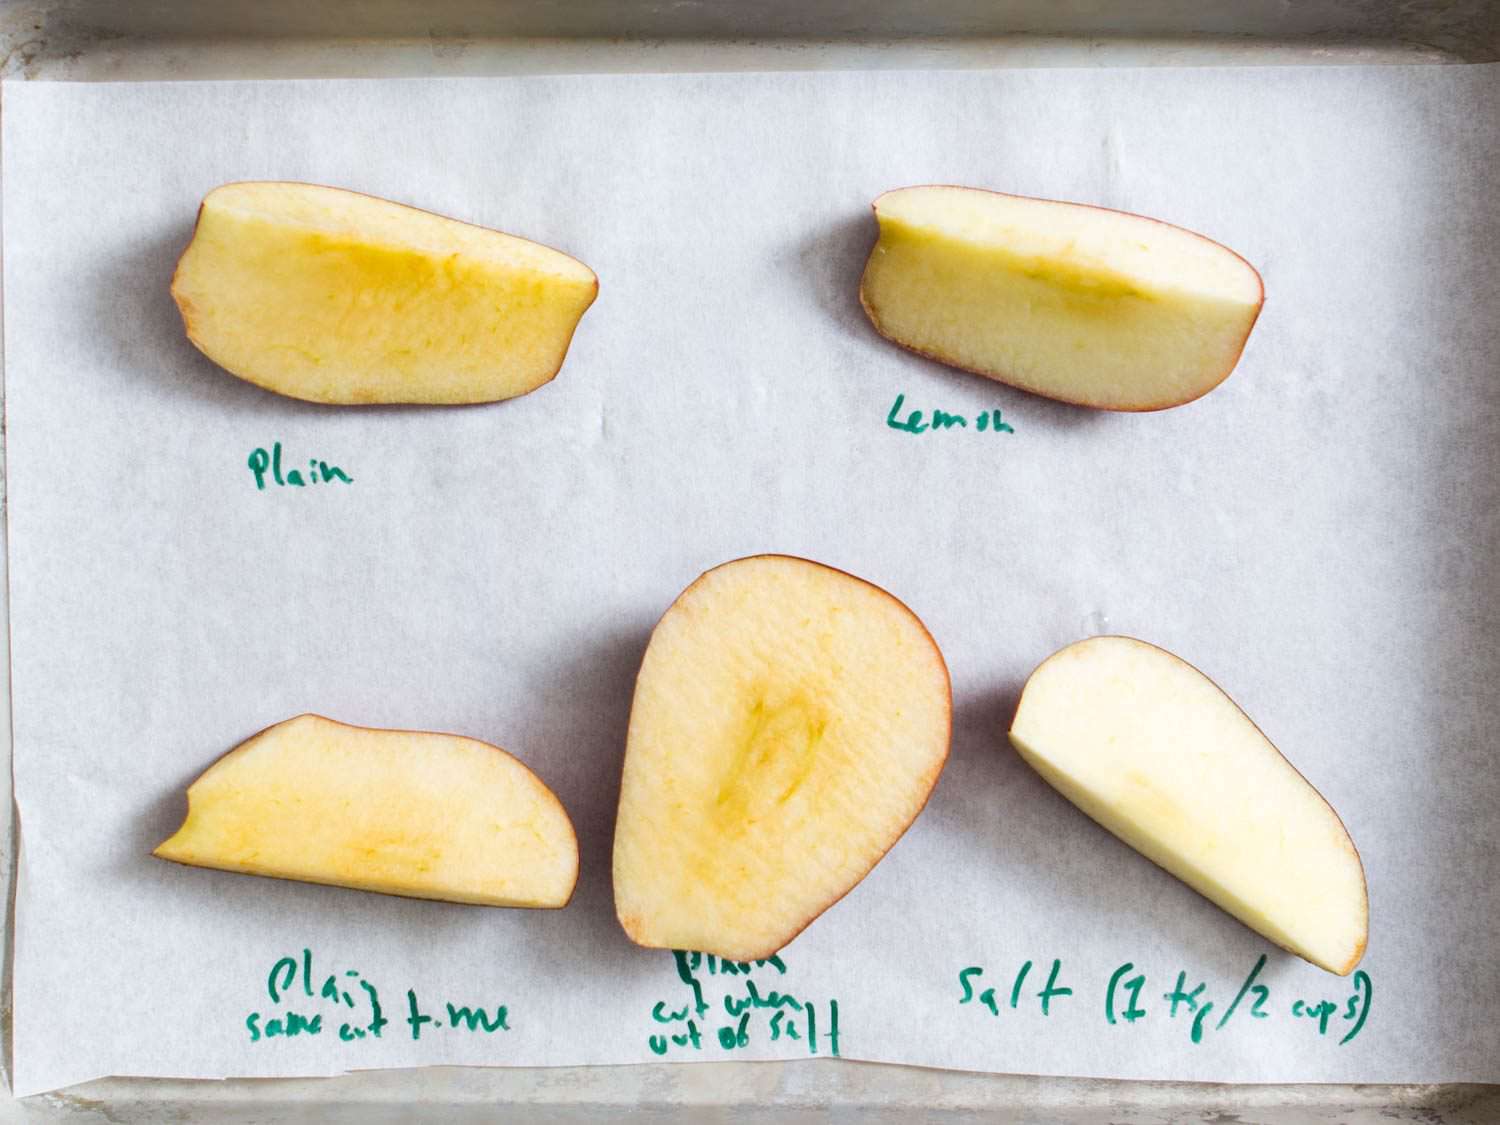 Comparison of cut apples that have been treated differently in order to prevent browning.